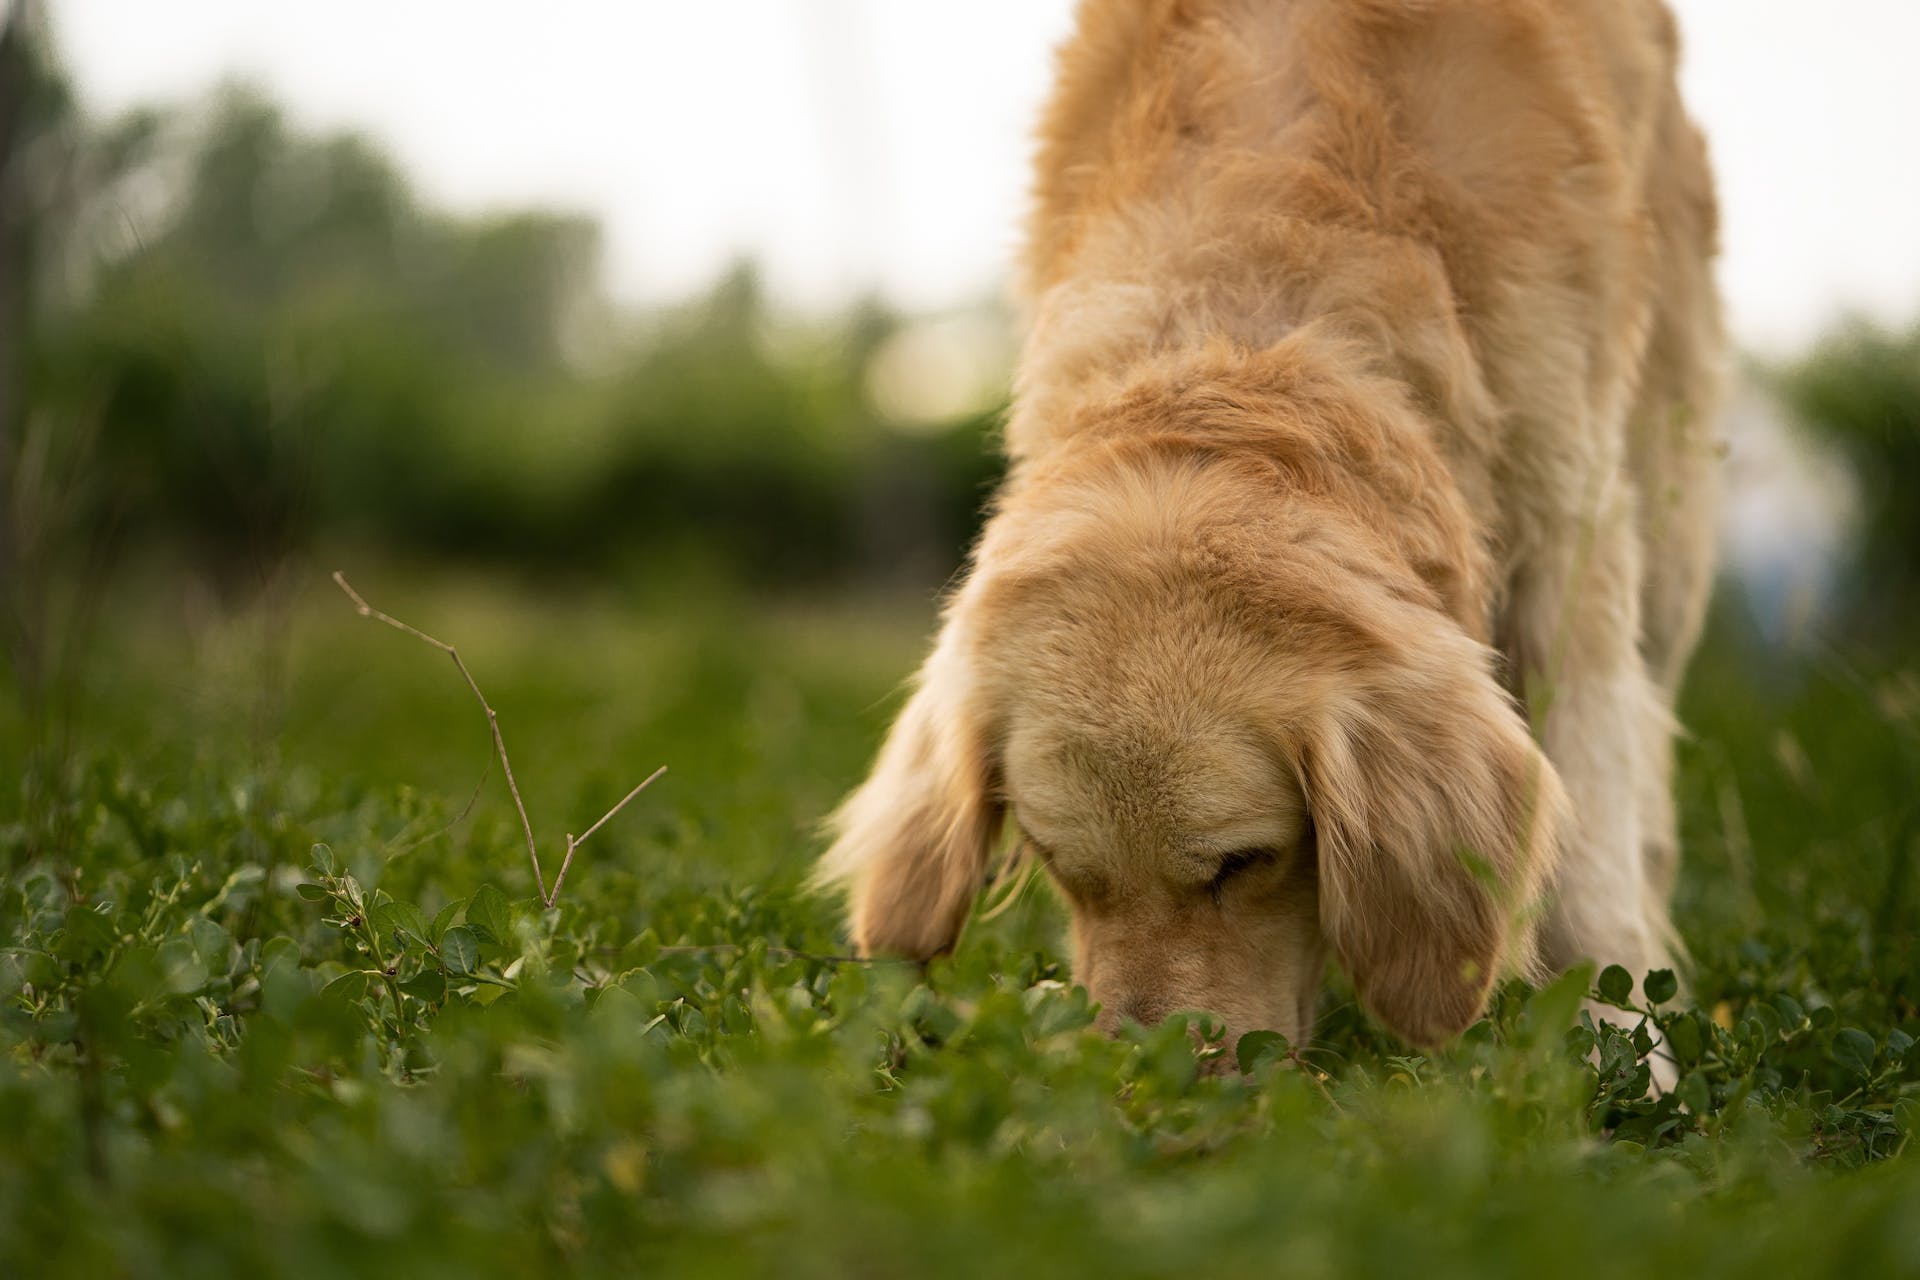 A dog sniffing grass